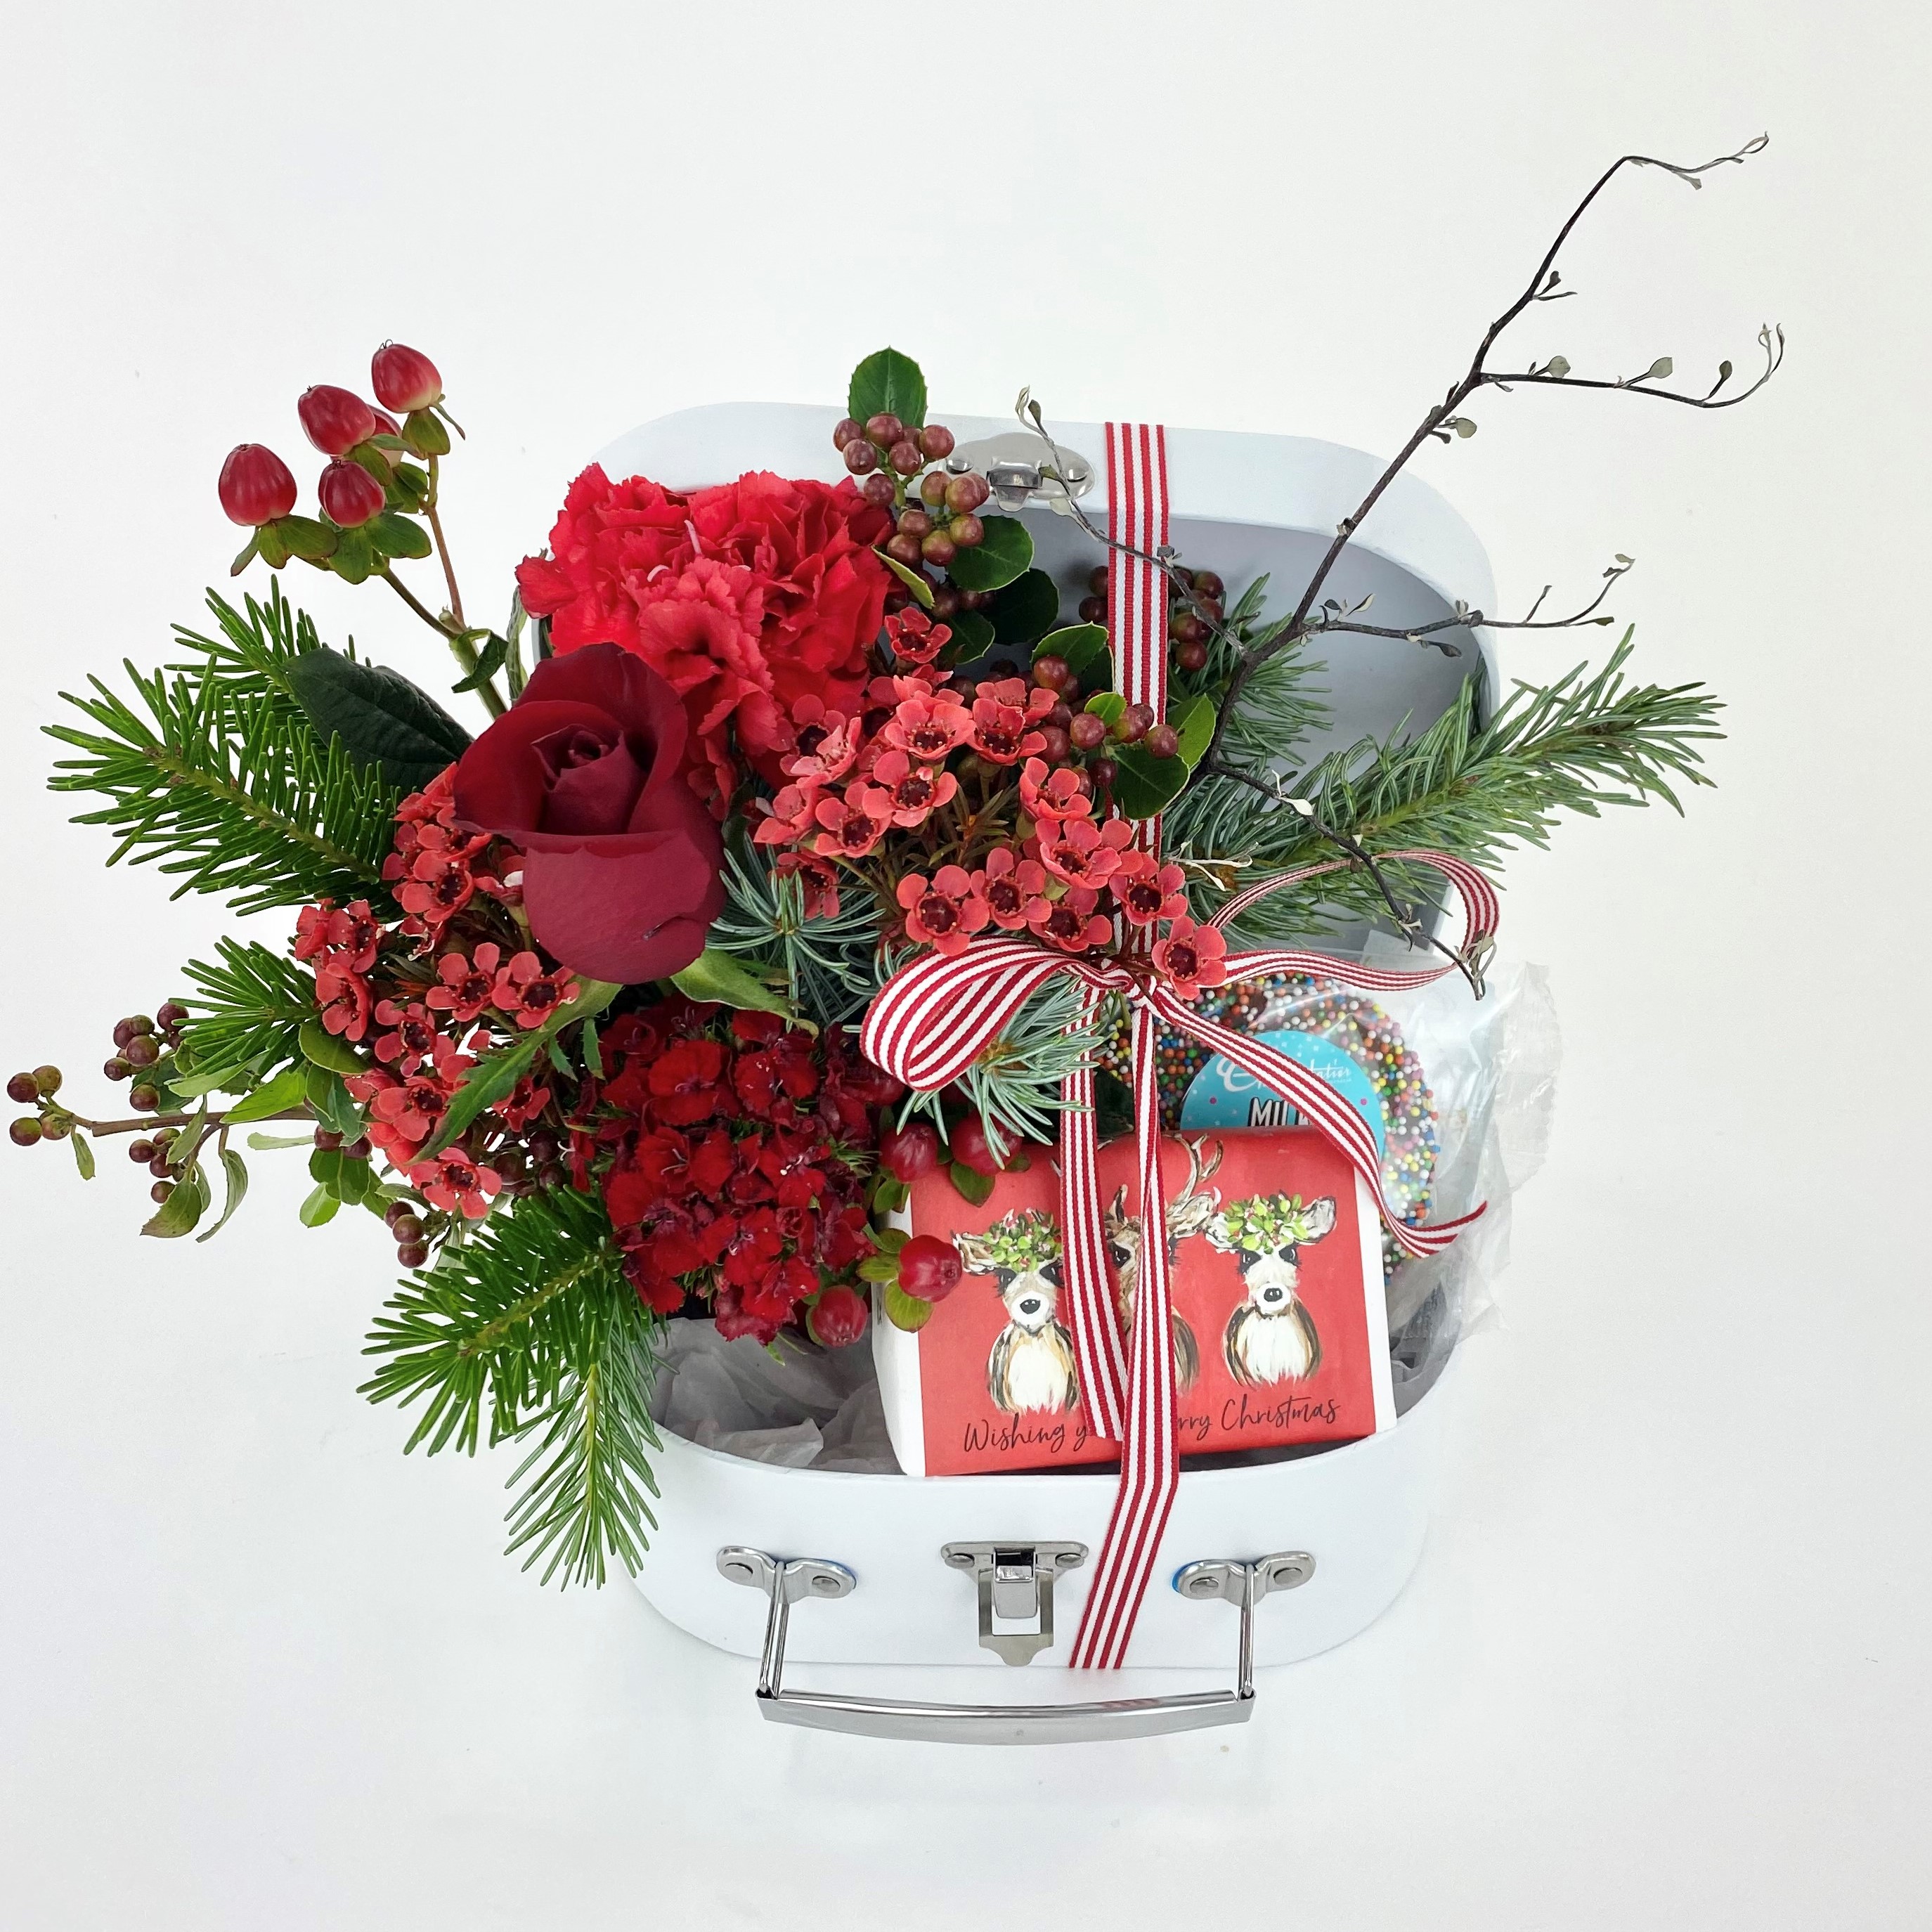 Christmas themed red and green flower arrangement with freckled chocolates and Huxter Merry Christmas hand soap